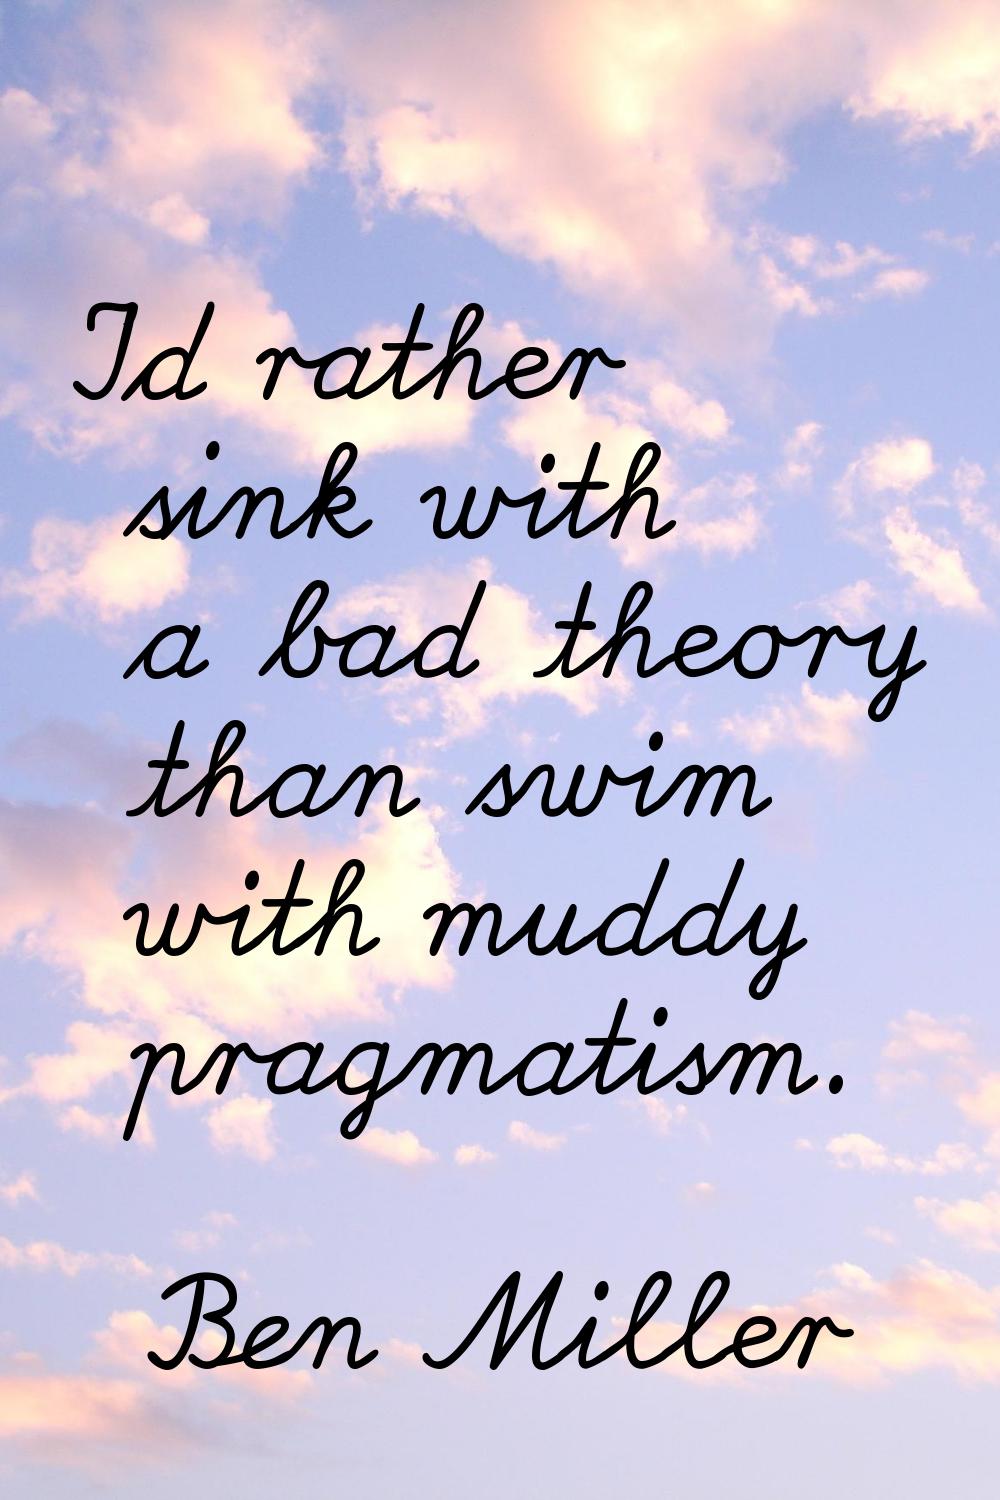 I'd rather sink with a bad theory than swim with muddy pragmatism.